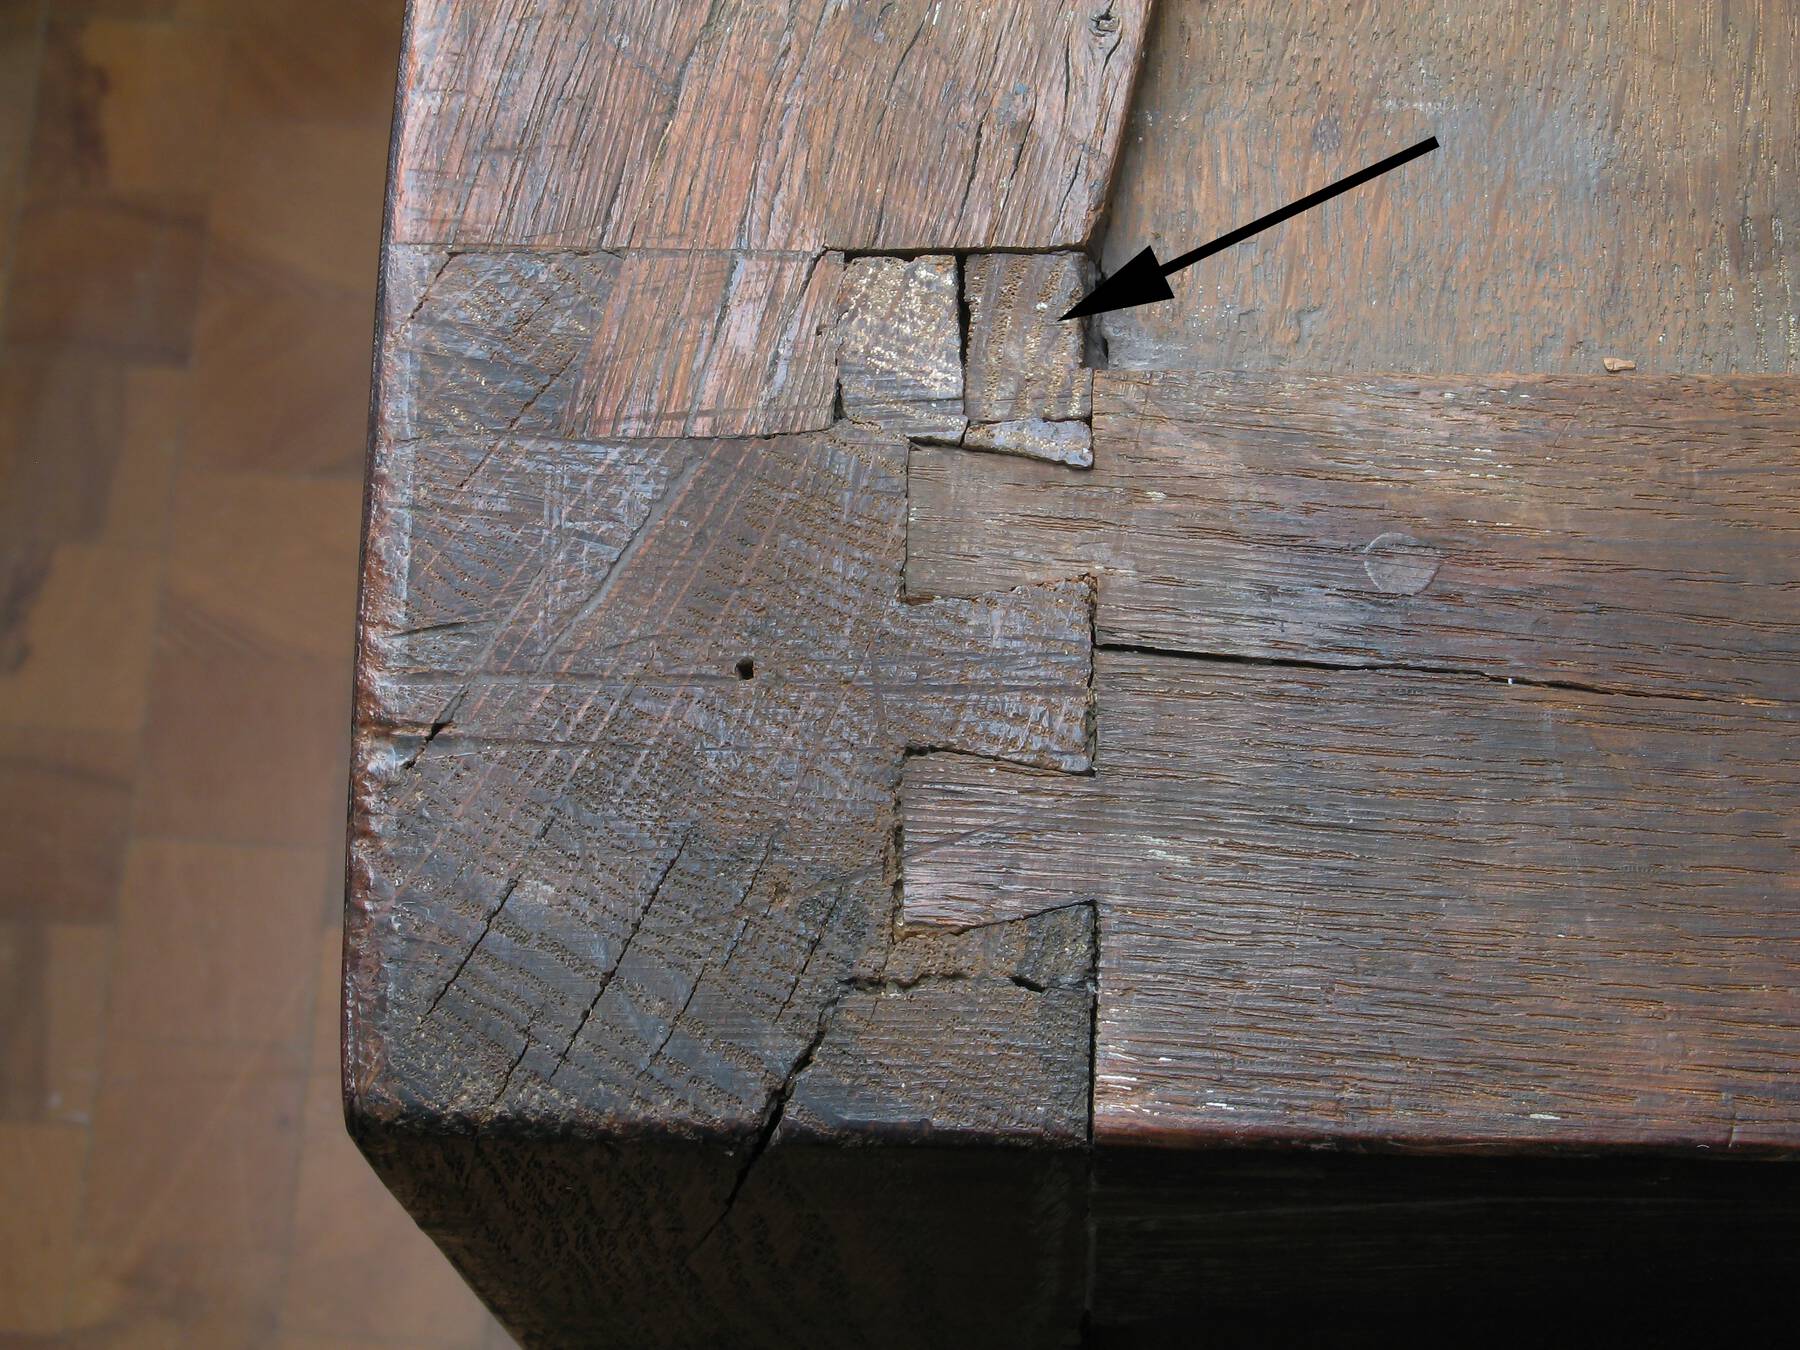 detail of one of the leg’s dovetail joints, with a black arrow superimposed onto the photograph to indicate where the final joint piece was inserted